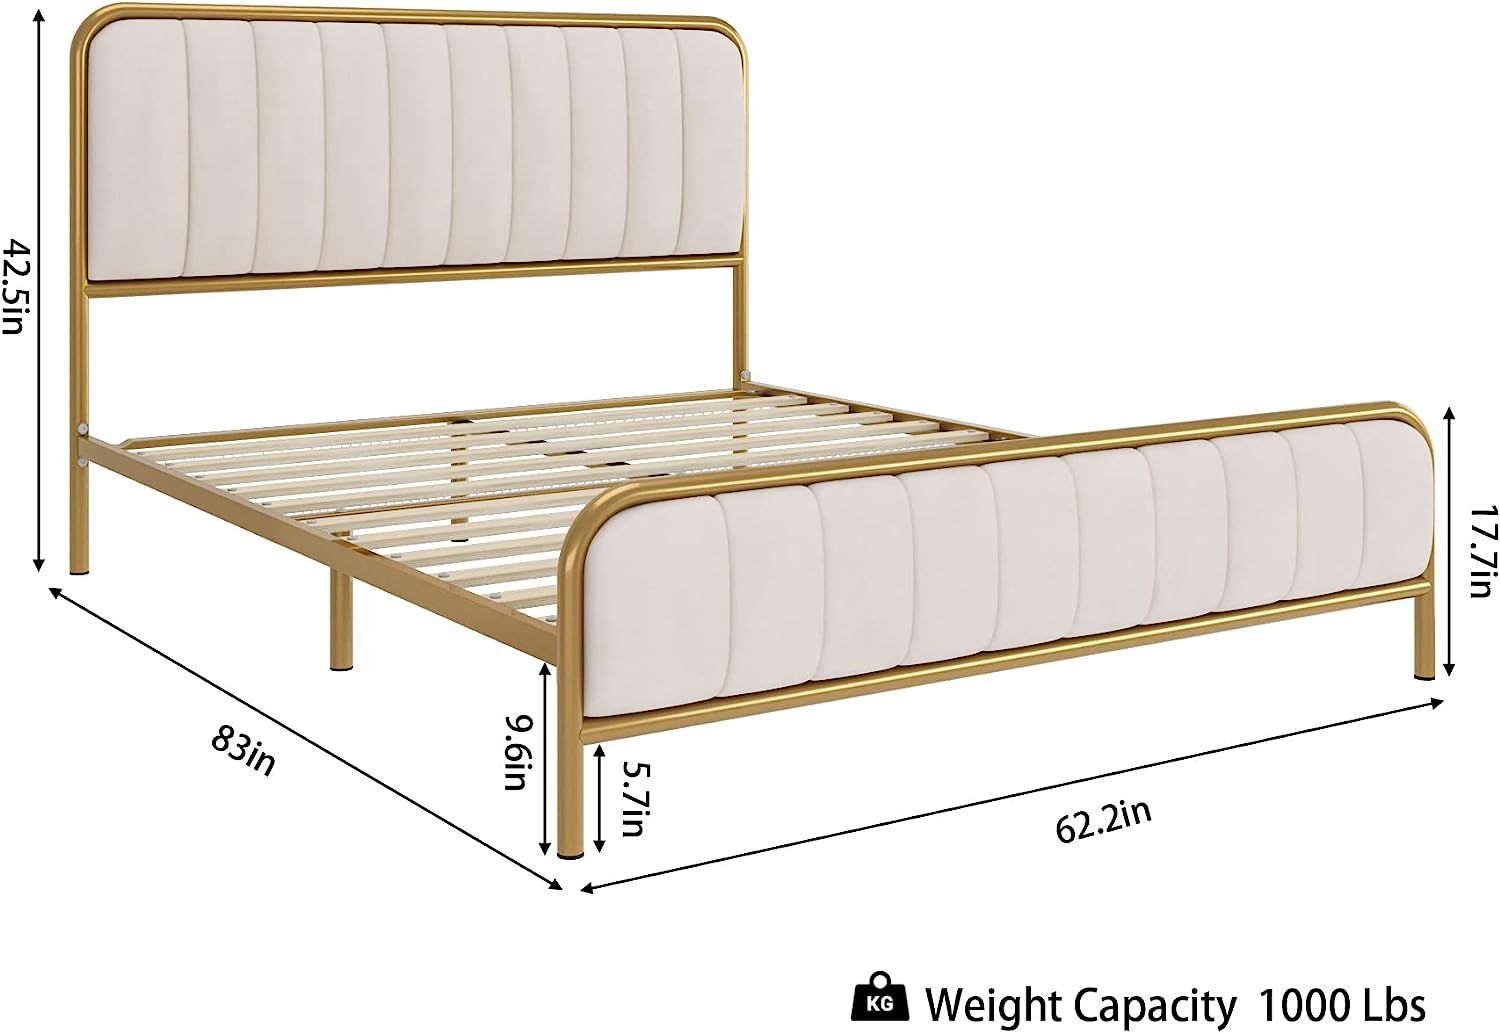 HITHOS Queen Size Bed Frame, Upholstered Bed Frame with Button Tufted Headboard, Heavy Duty Metal... | Amazon (US)